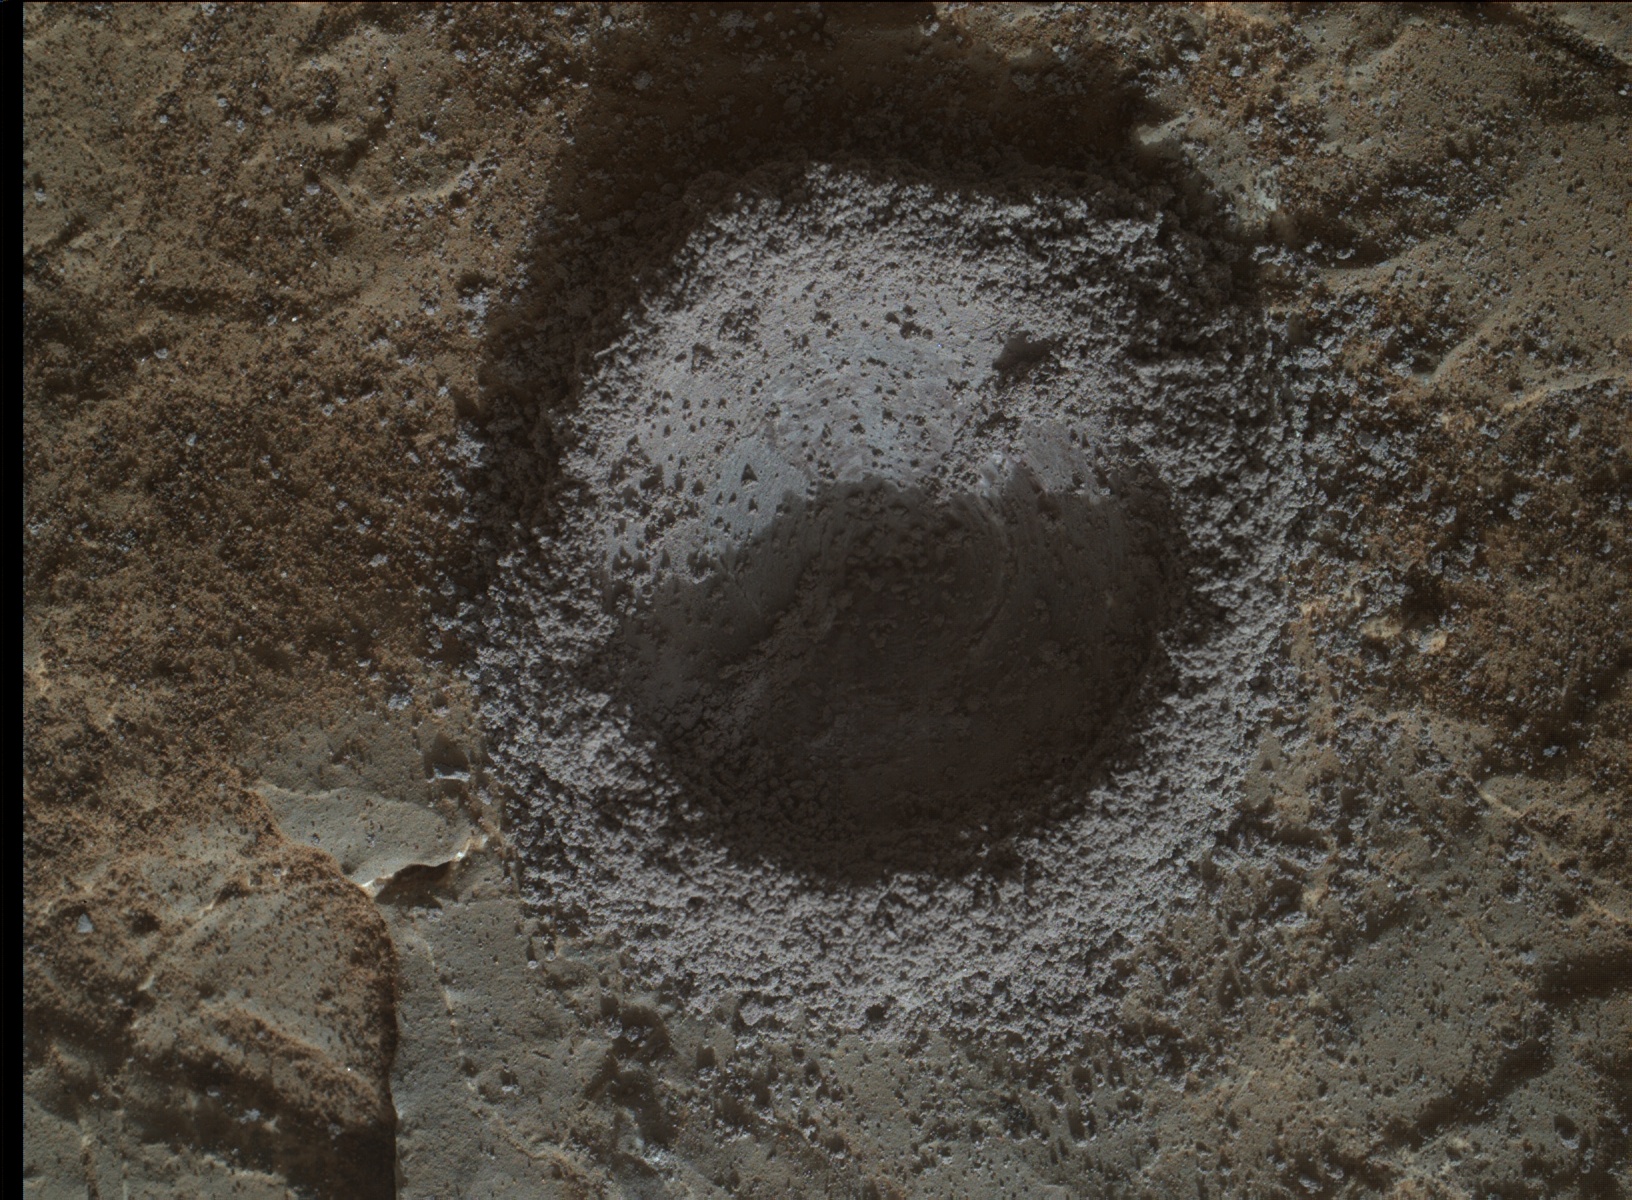 Nasa's Mars rover Curiosity acquired this image using its Mars Hand Lens Imager (MAHLI) on Sol 1984